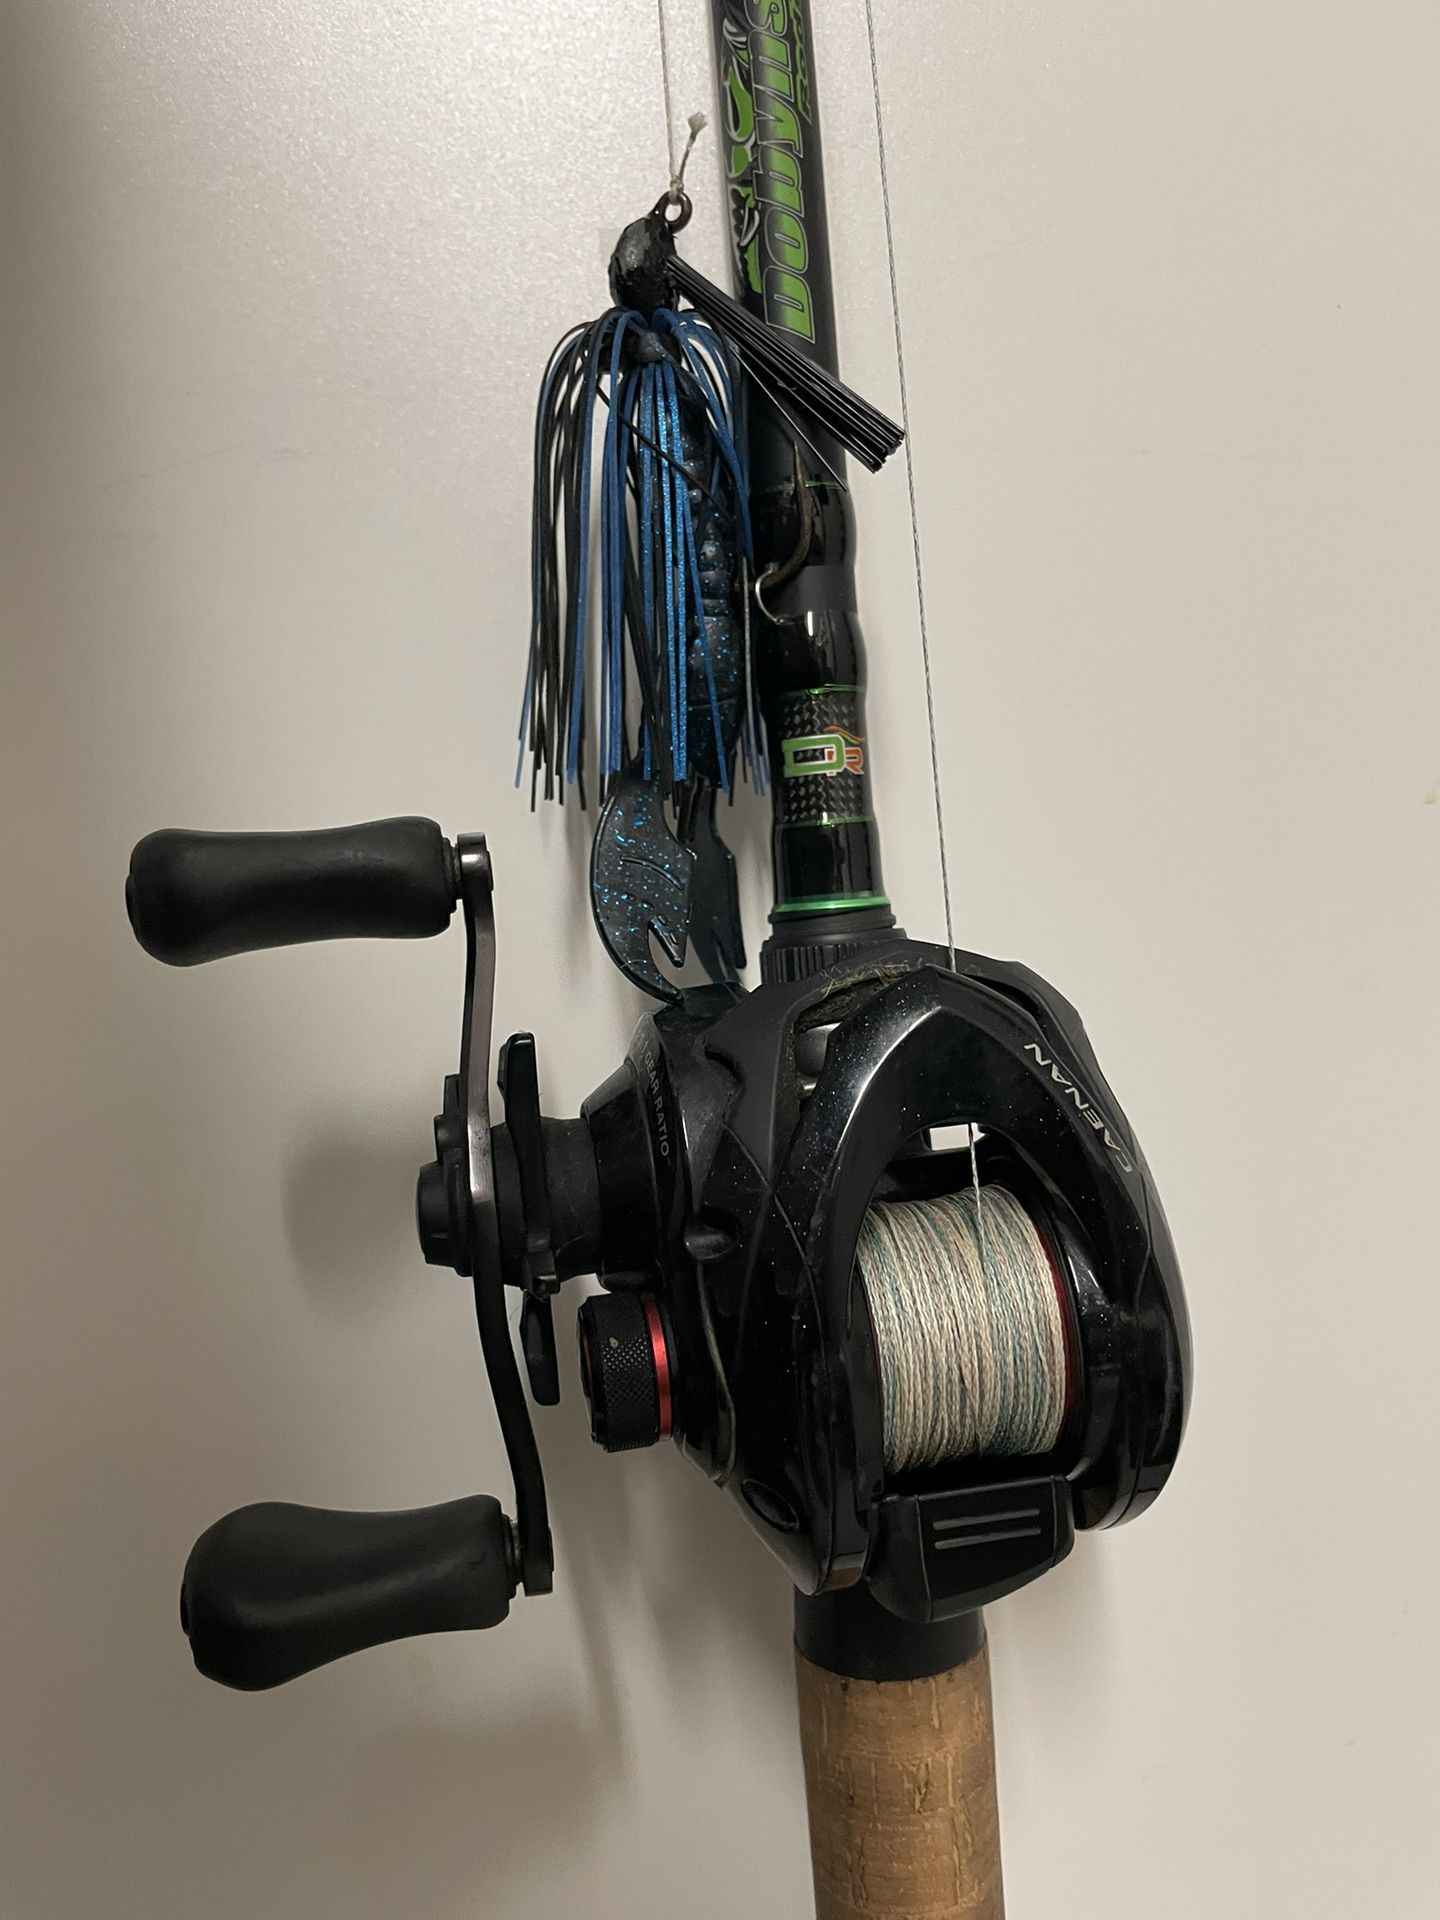 Dobyns Fury “Flippin Stick” Baitcasting Rod With Shimano Caenan Reel for  Sale in Stockton, CA - OfferUp